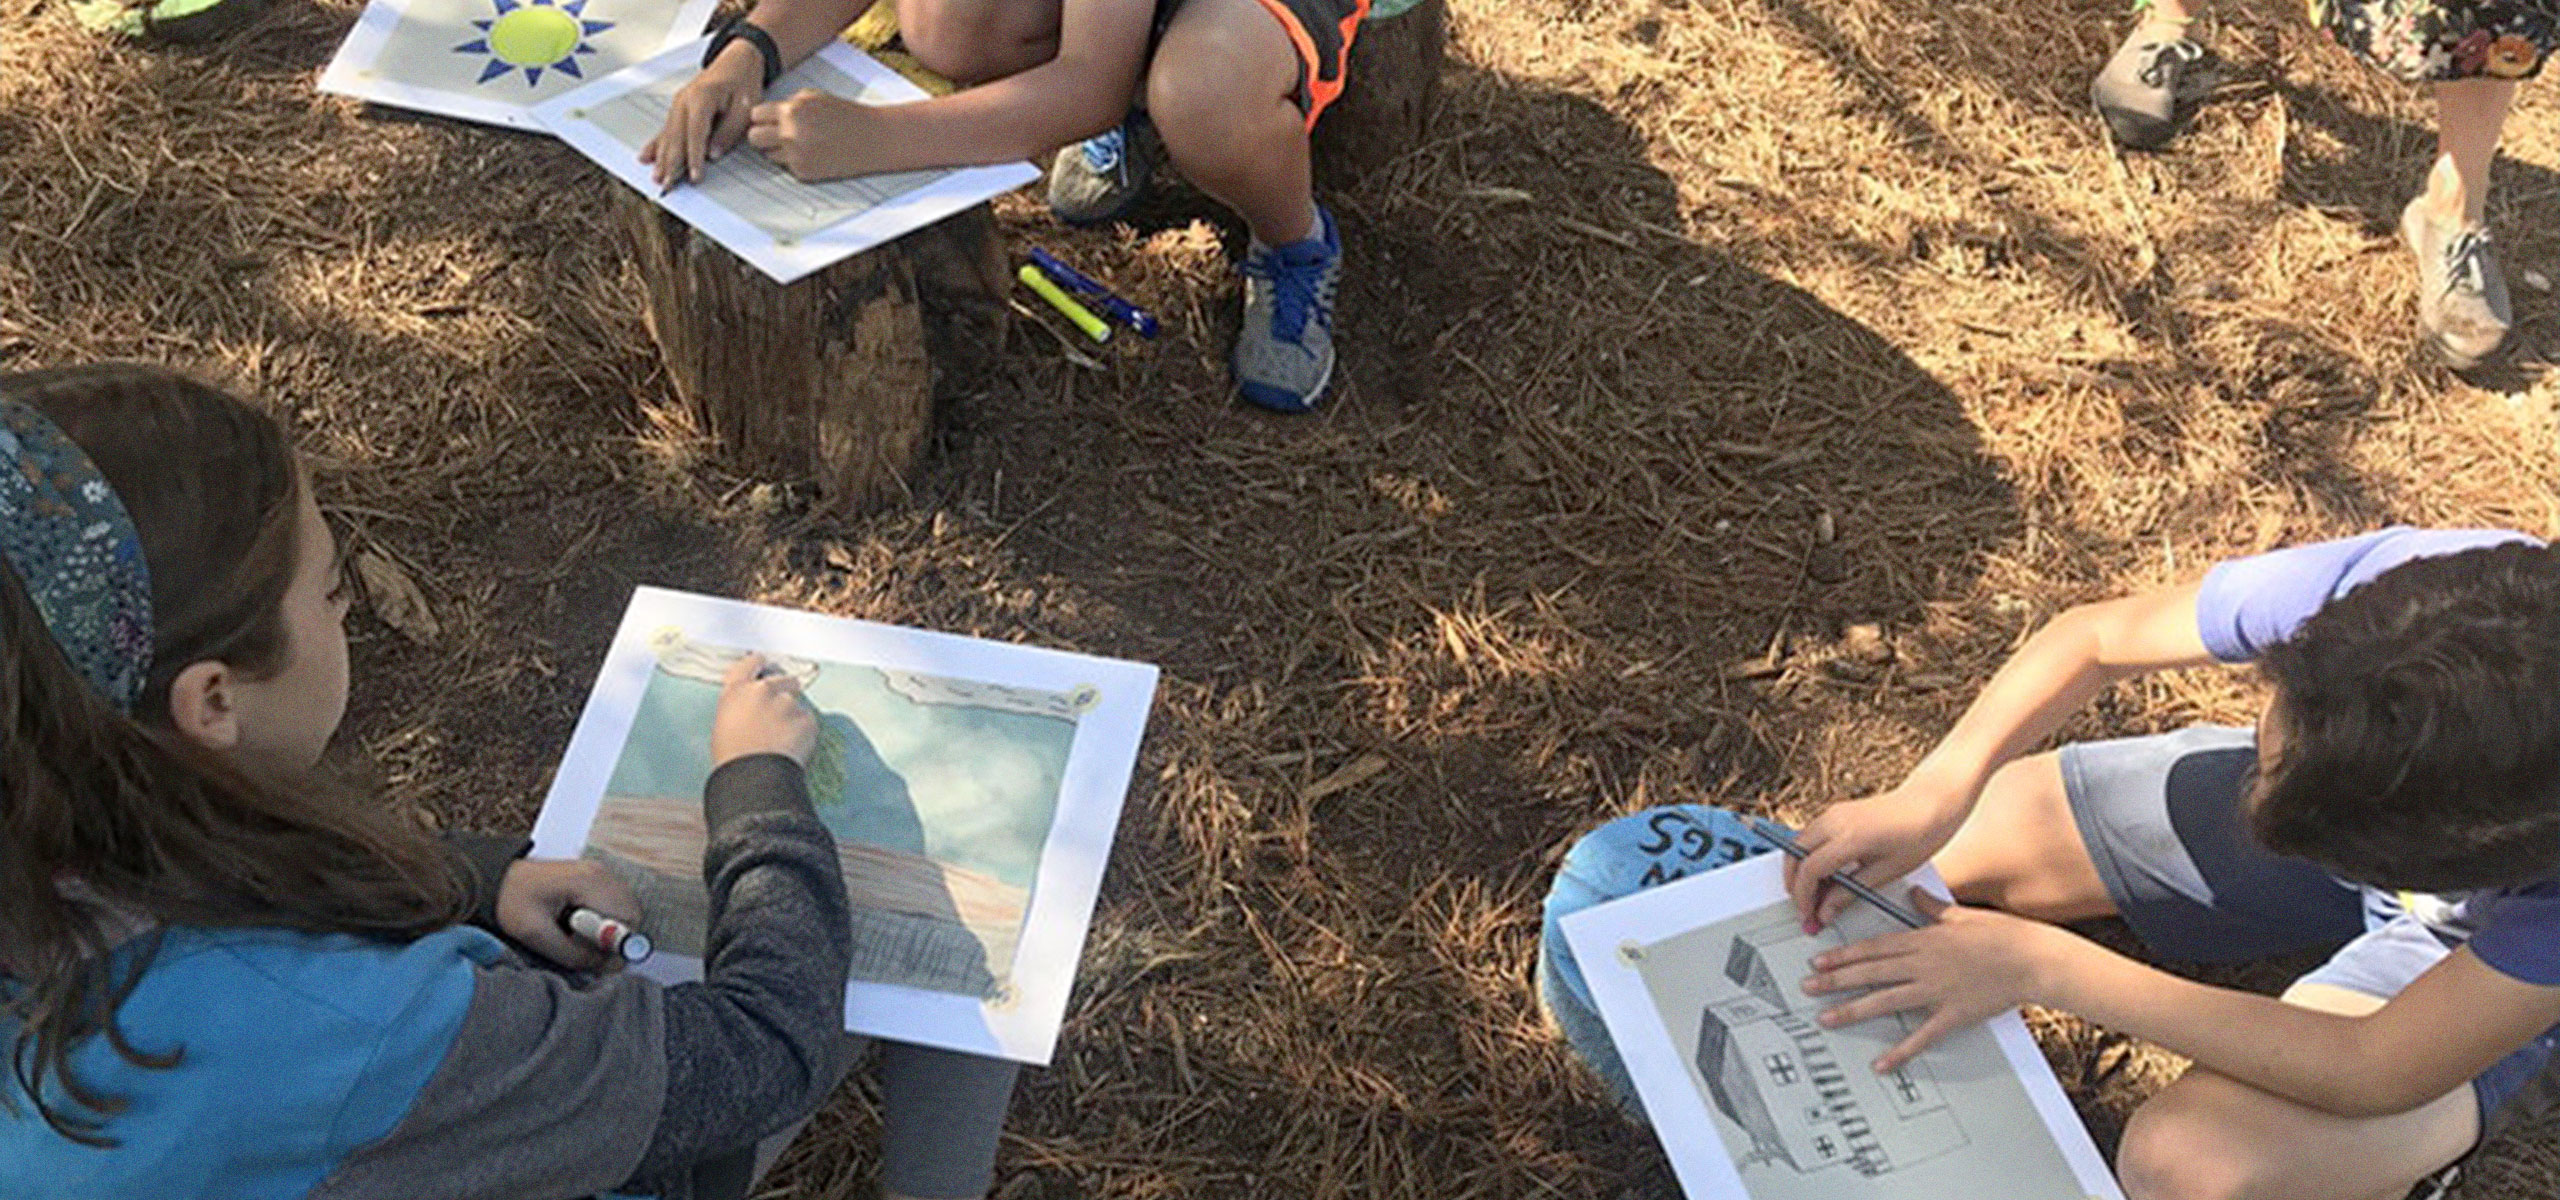 A group of children sitting and drawing architecture. Image Courtesy of AIA.